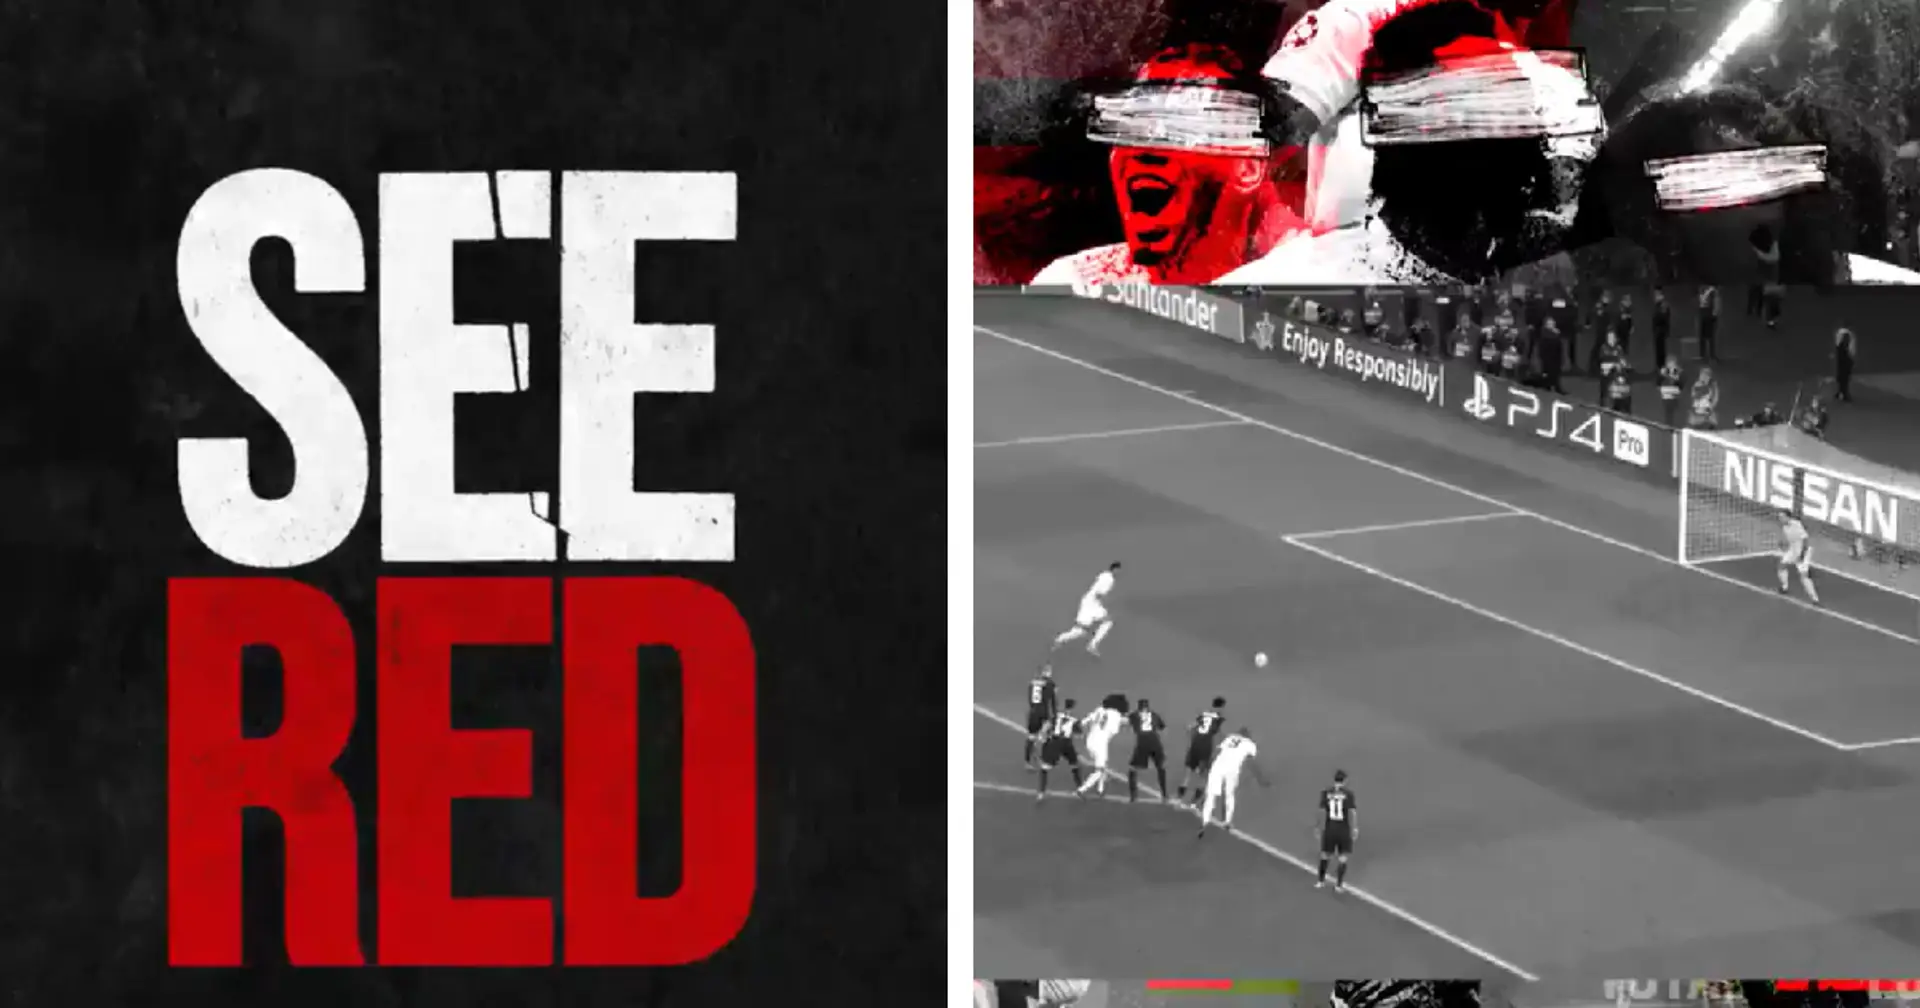 Man United urge fans to 'See Red' in powerful campaign to fight racial abuse 